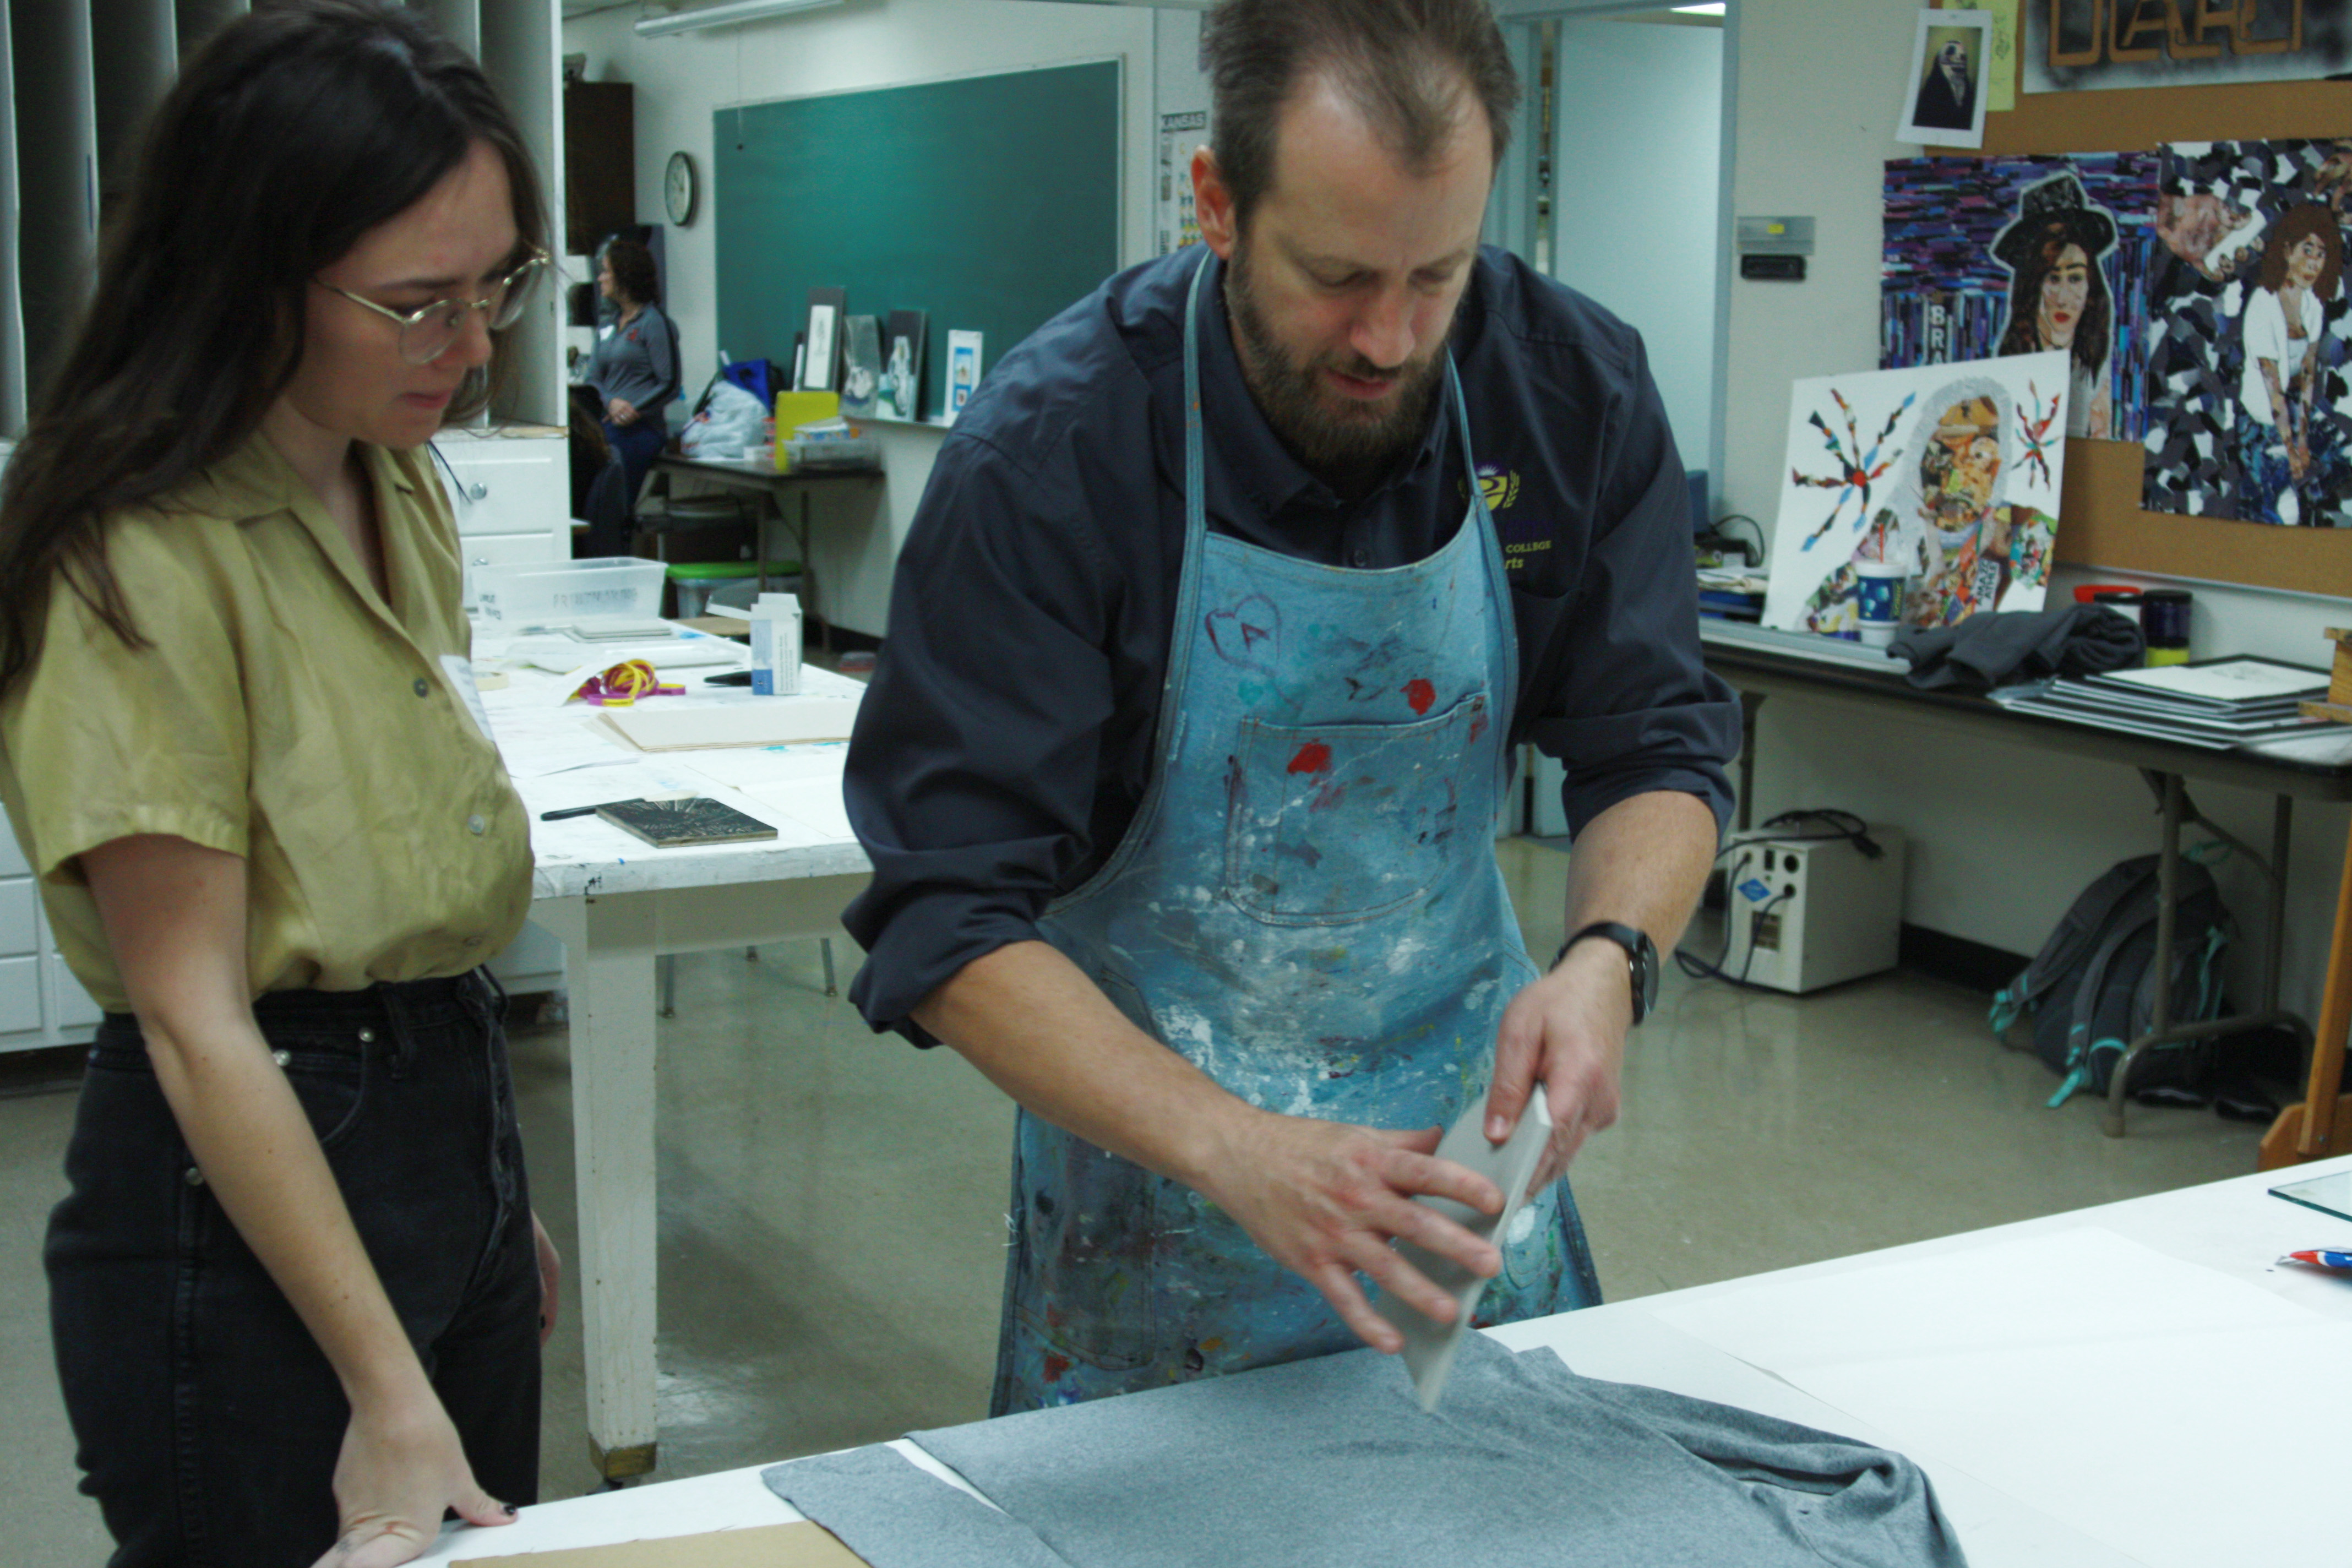 Professor Goldword demonstrates a technique for inking t-shirts for a student visiting for Sampler Day